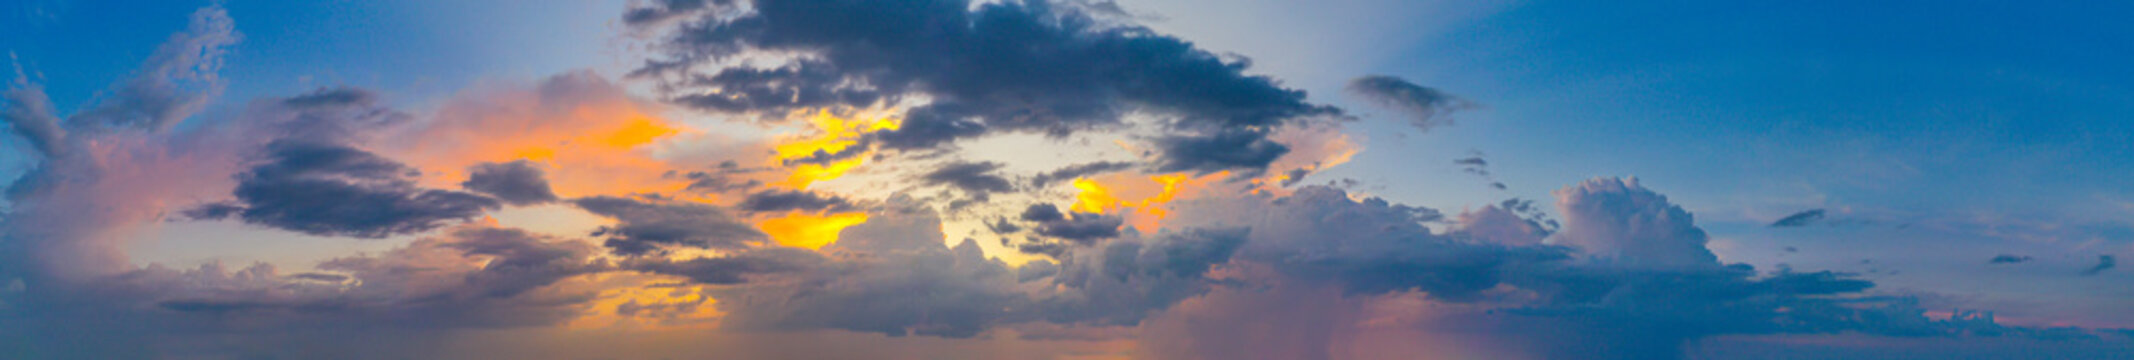 Twilight and sunset with colorful clouds. Colorful panorama of High resolution sky.